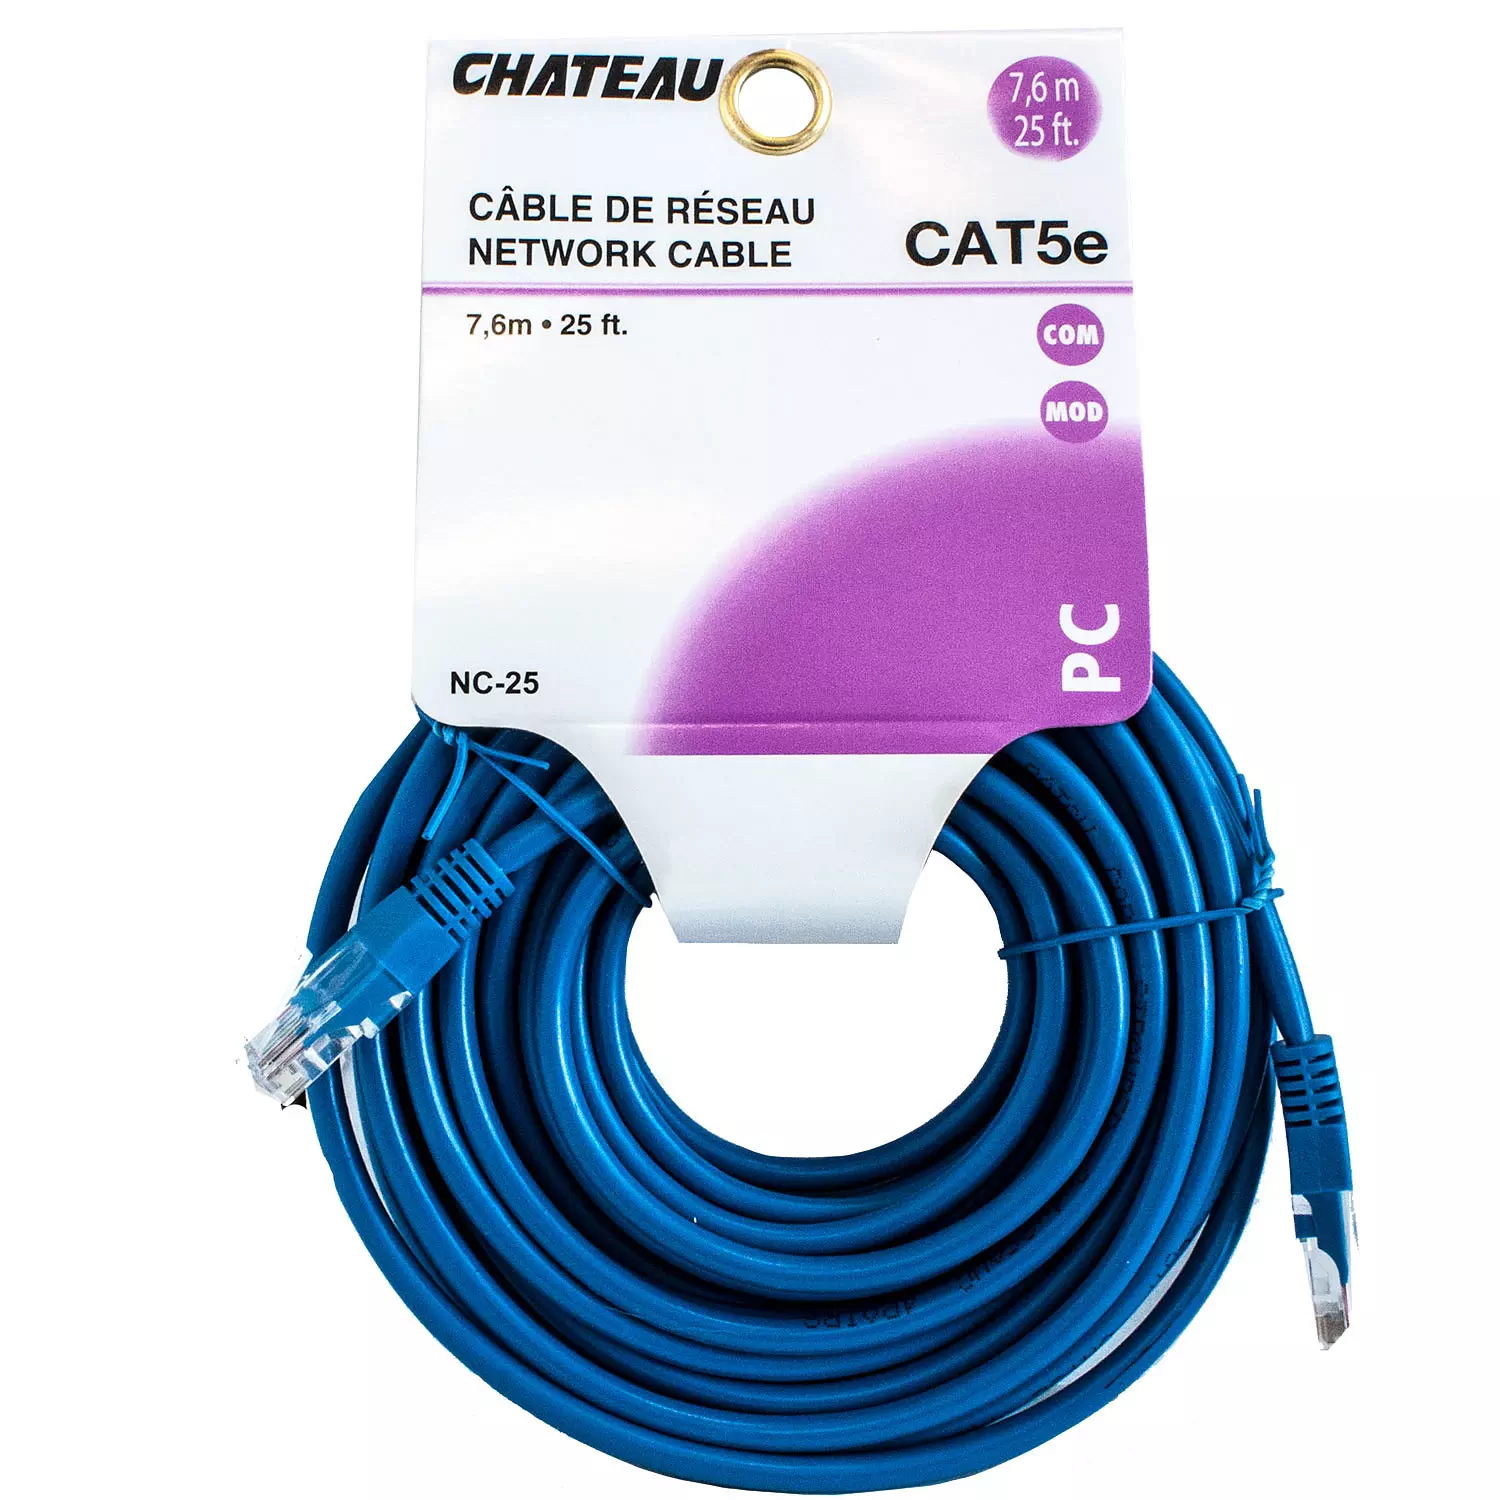 CAT5e network cable, 25ft (7.5m)